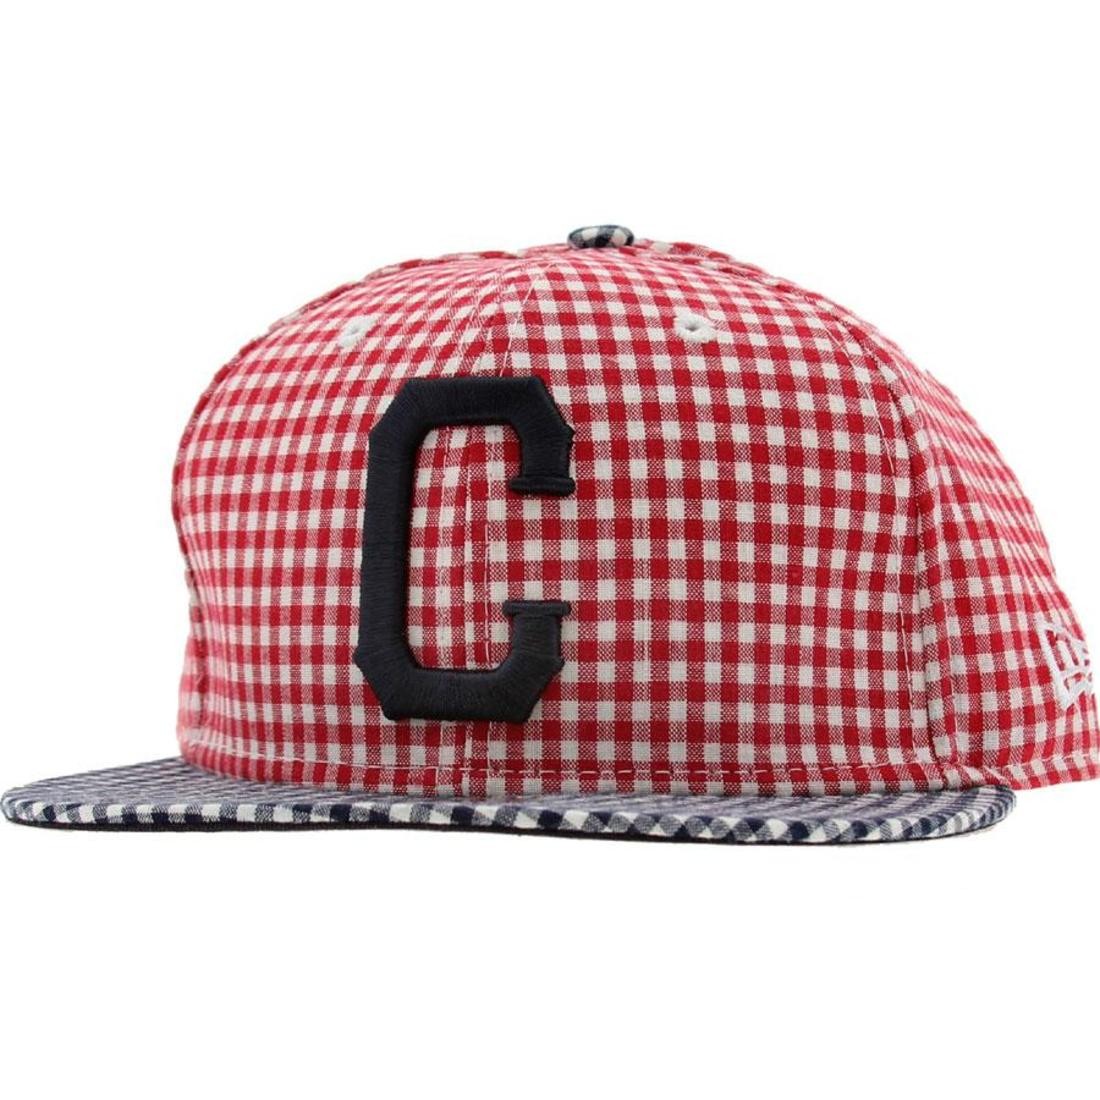 Crooks and Castles Plaid New Era Fitted Cap (red / white)